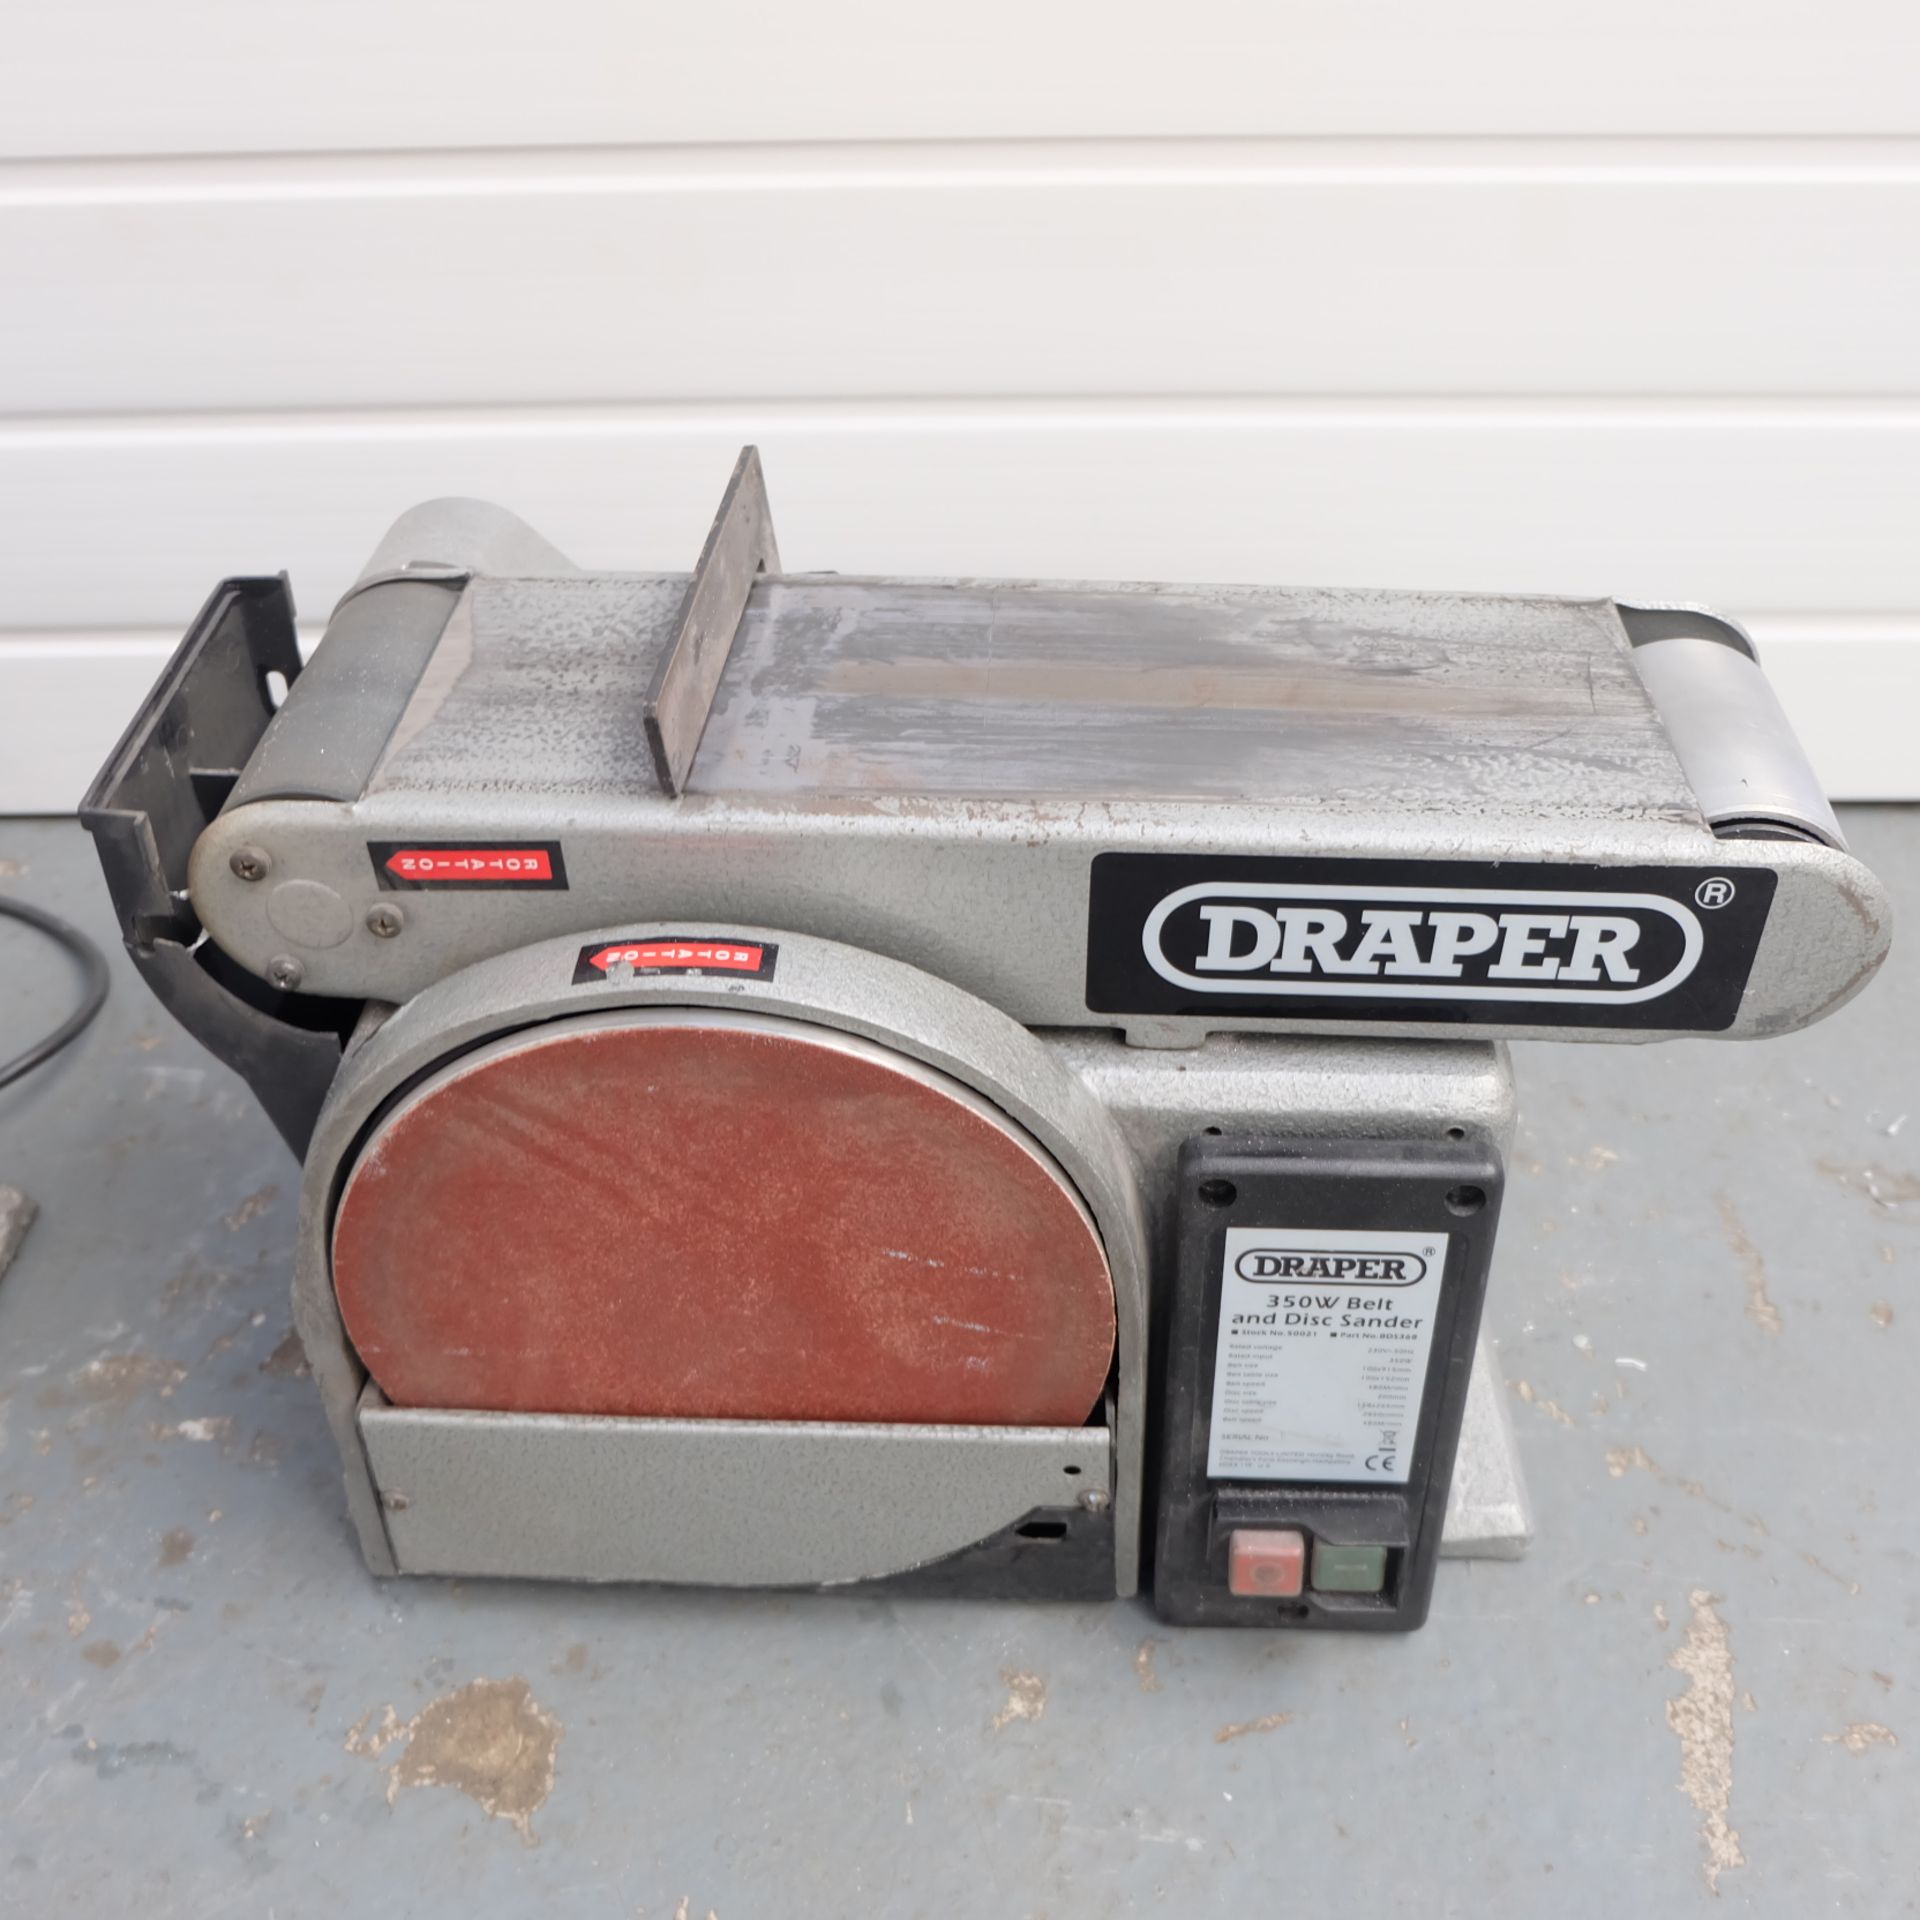 Two Draper 350W Belt and Disc Sanders. Spares or Repairs. - Image 4 of 5